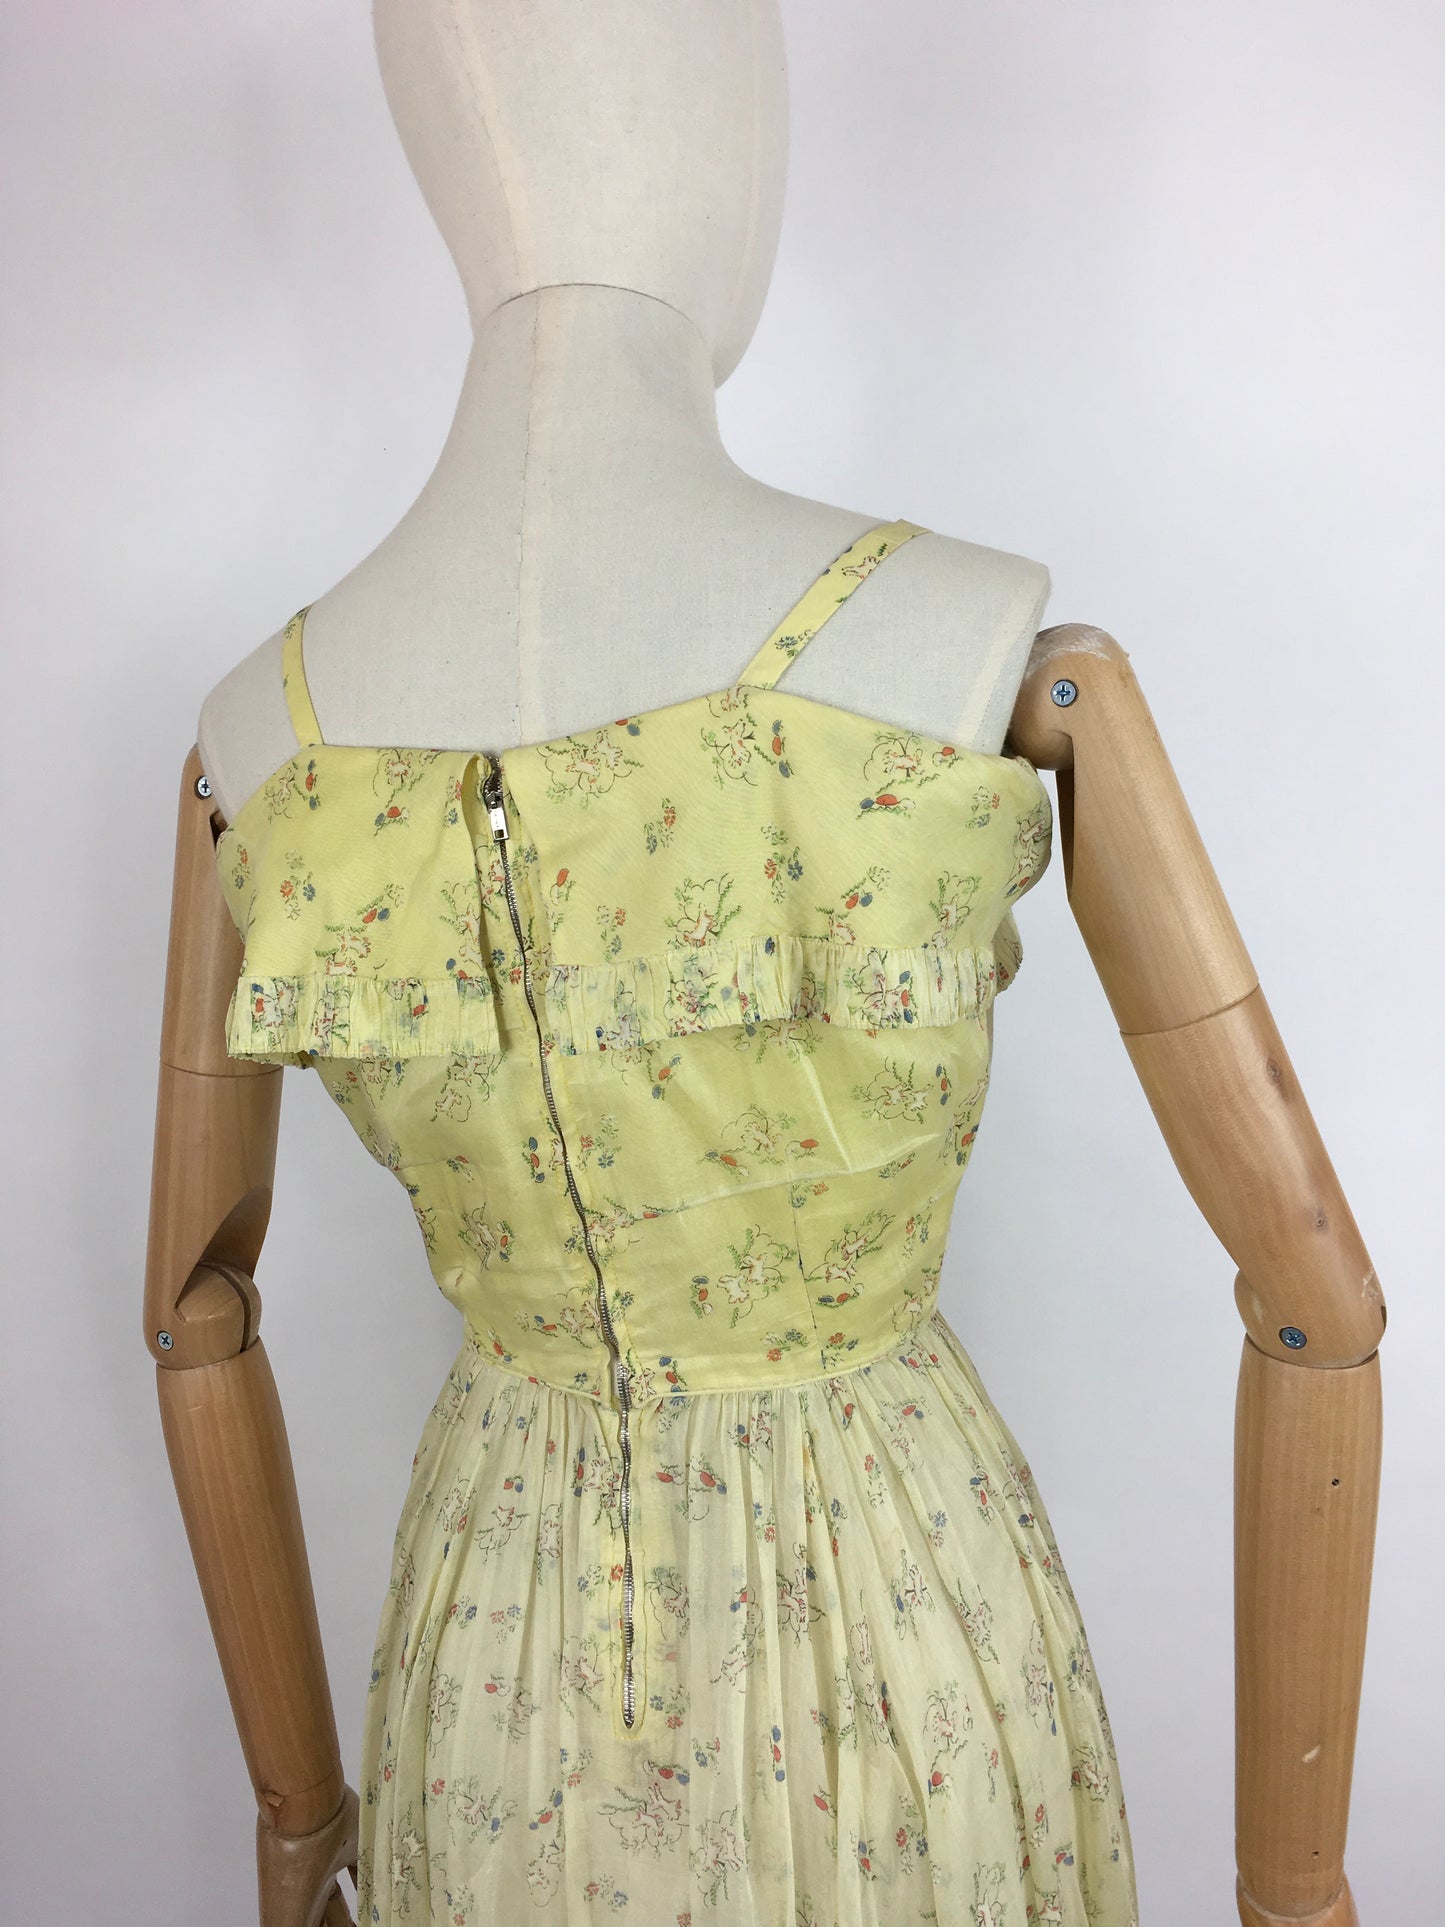 Original 1930s Sundress - In an Amazing Novelty Print Featuring Leaping Lambs and Toadstools On a Pale Lemon Cotton Lawn